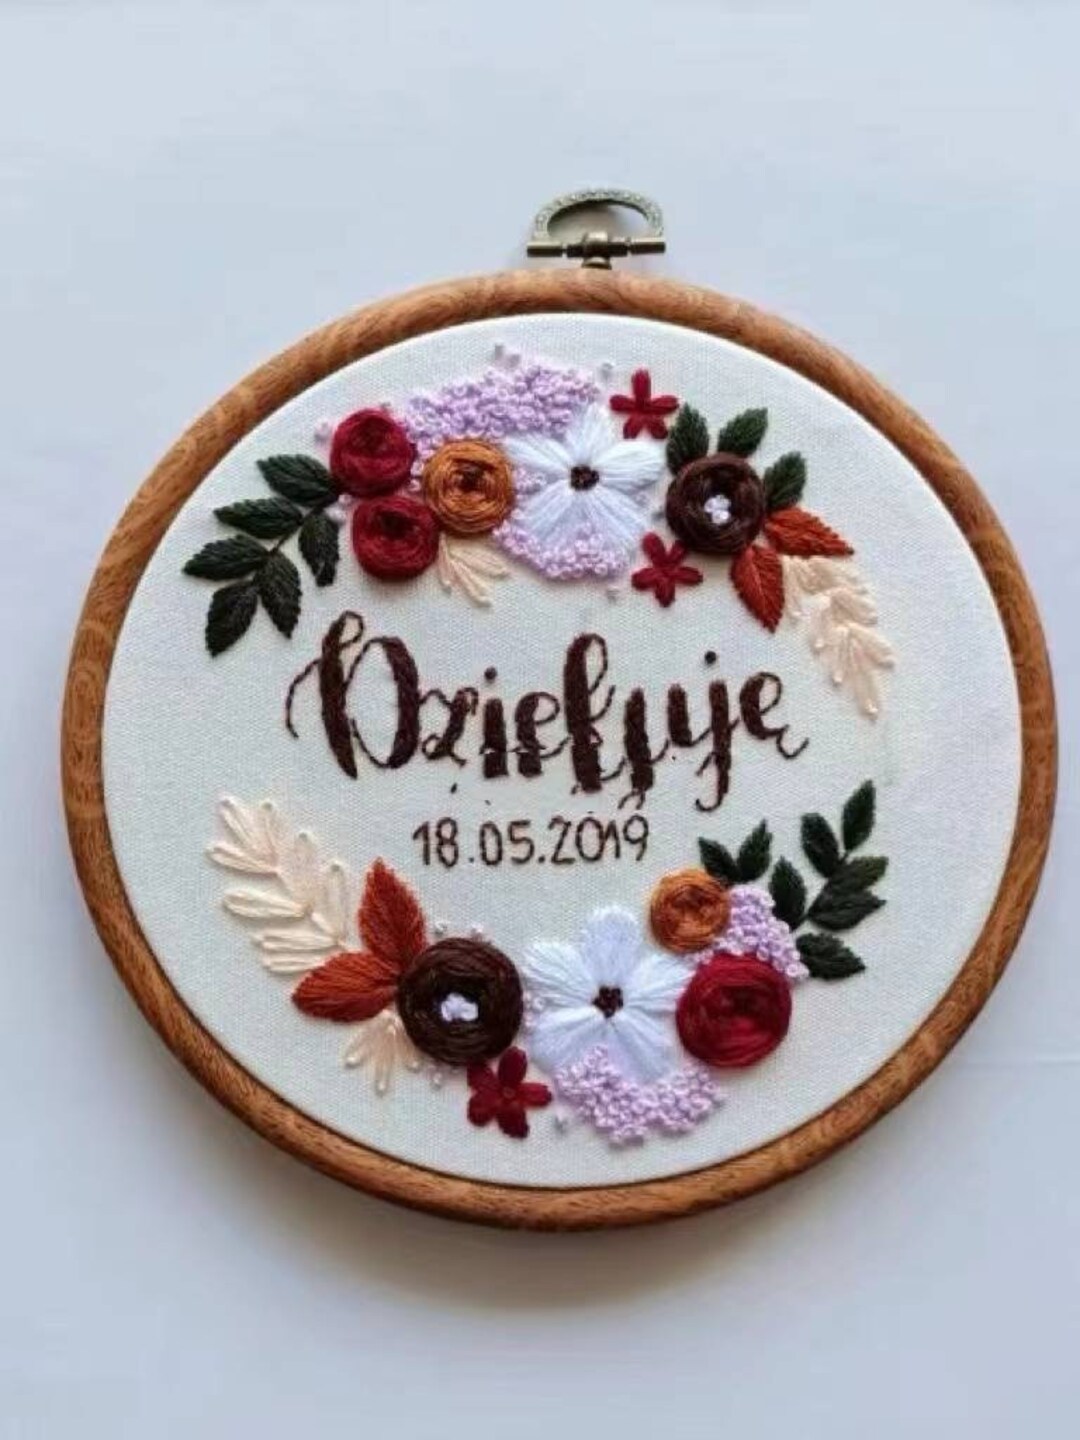 Custom Embroidery Kit for Beginners, Birthday/ Engagment/ Wedding Gift,  Date Customized Embroidery, DIY Floral Embroidery Kits 